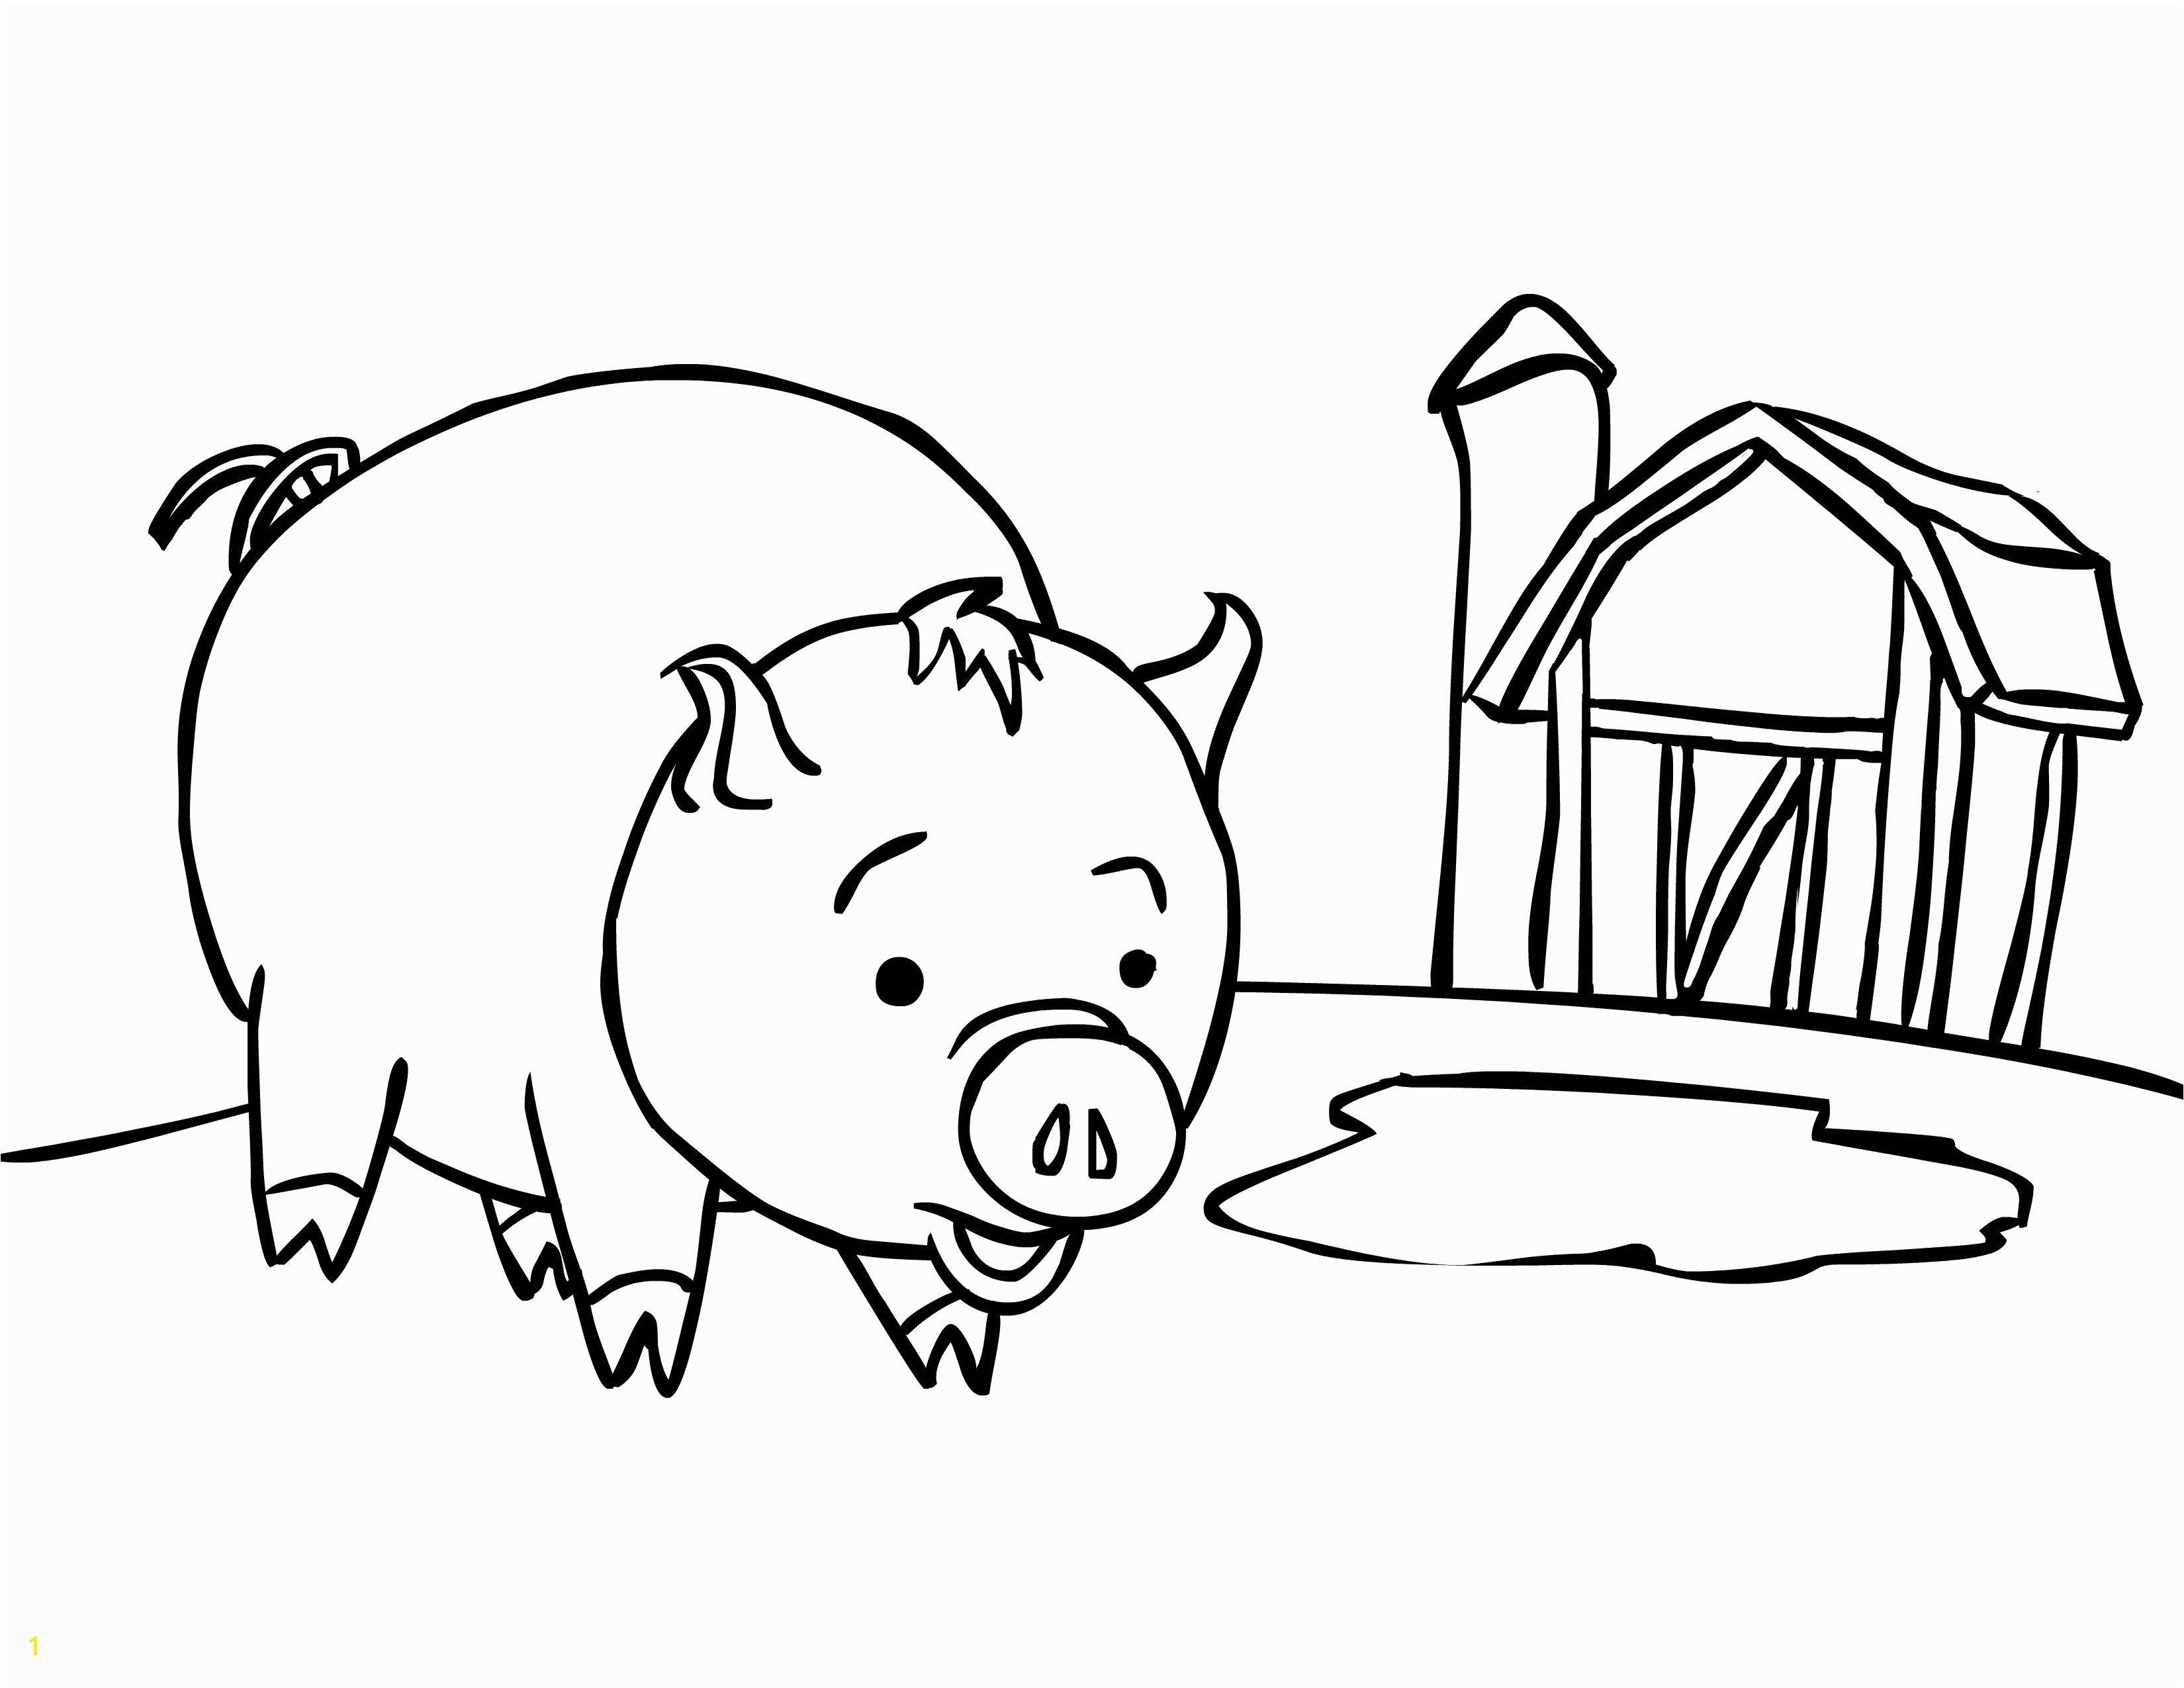 New Cartoon Pig Coloring Pages Gallery Printable Coloring Sheet Pig Coloring Page 9 